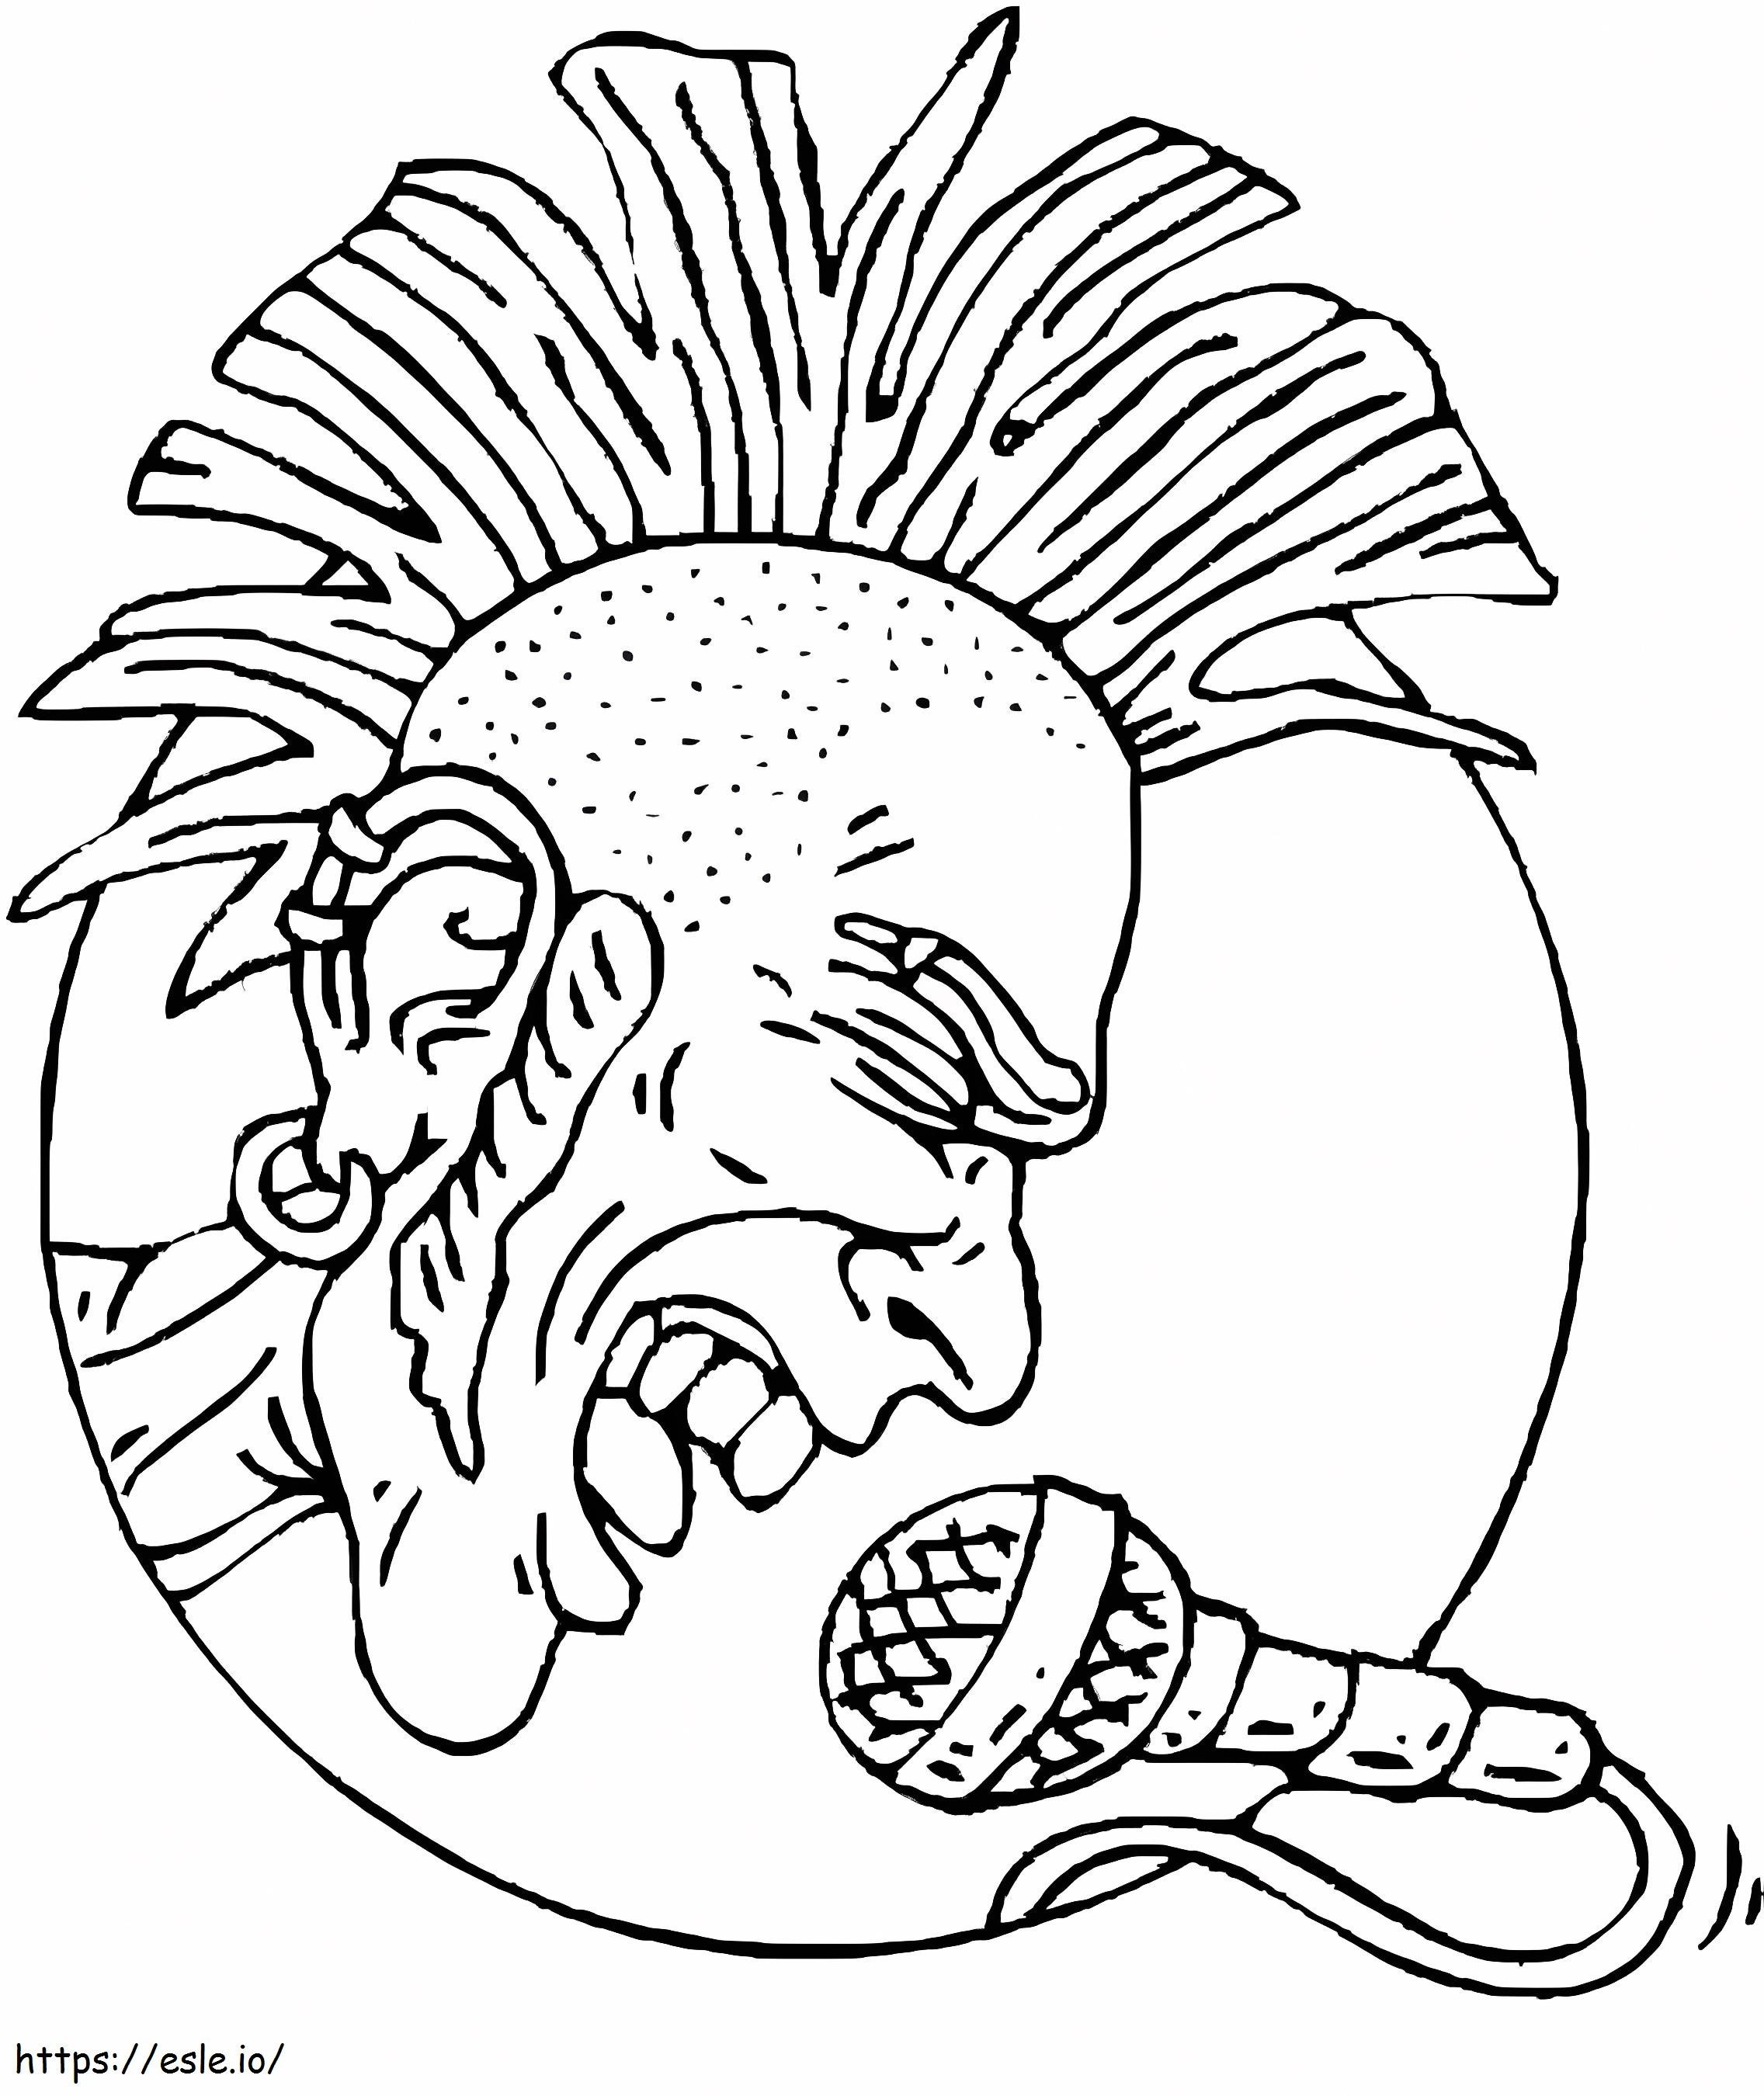 Rock Star Singer 2 coloring page